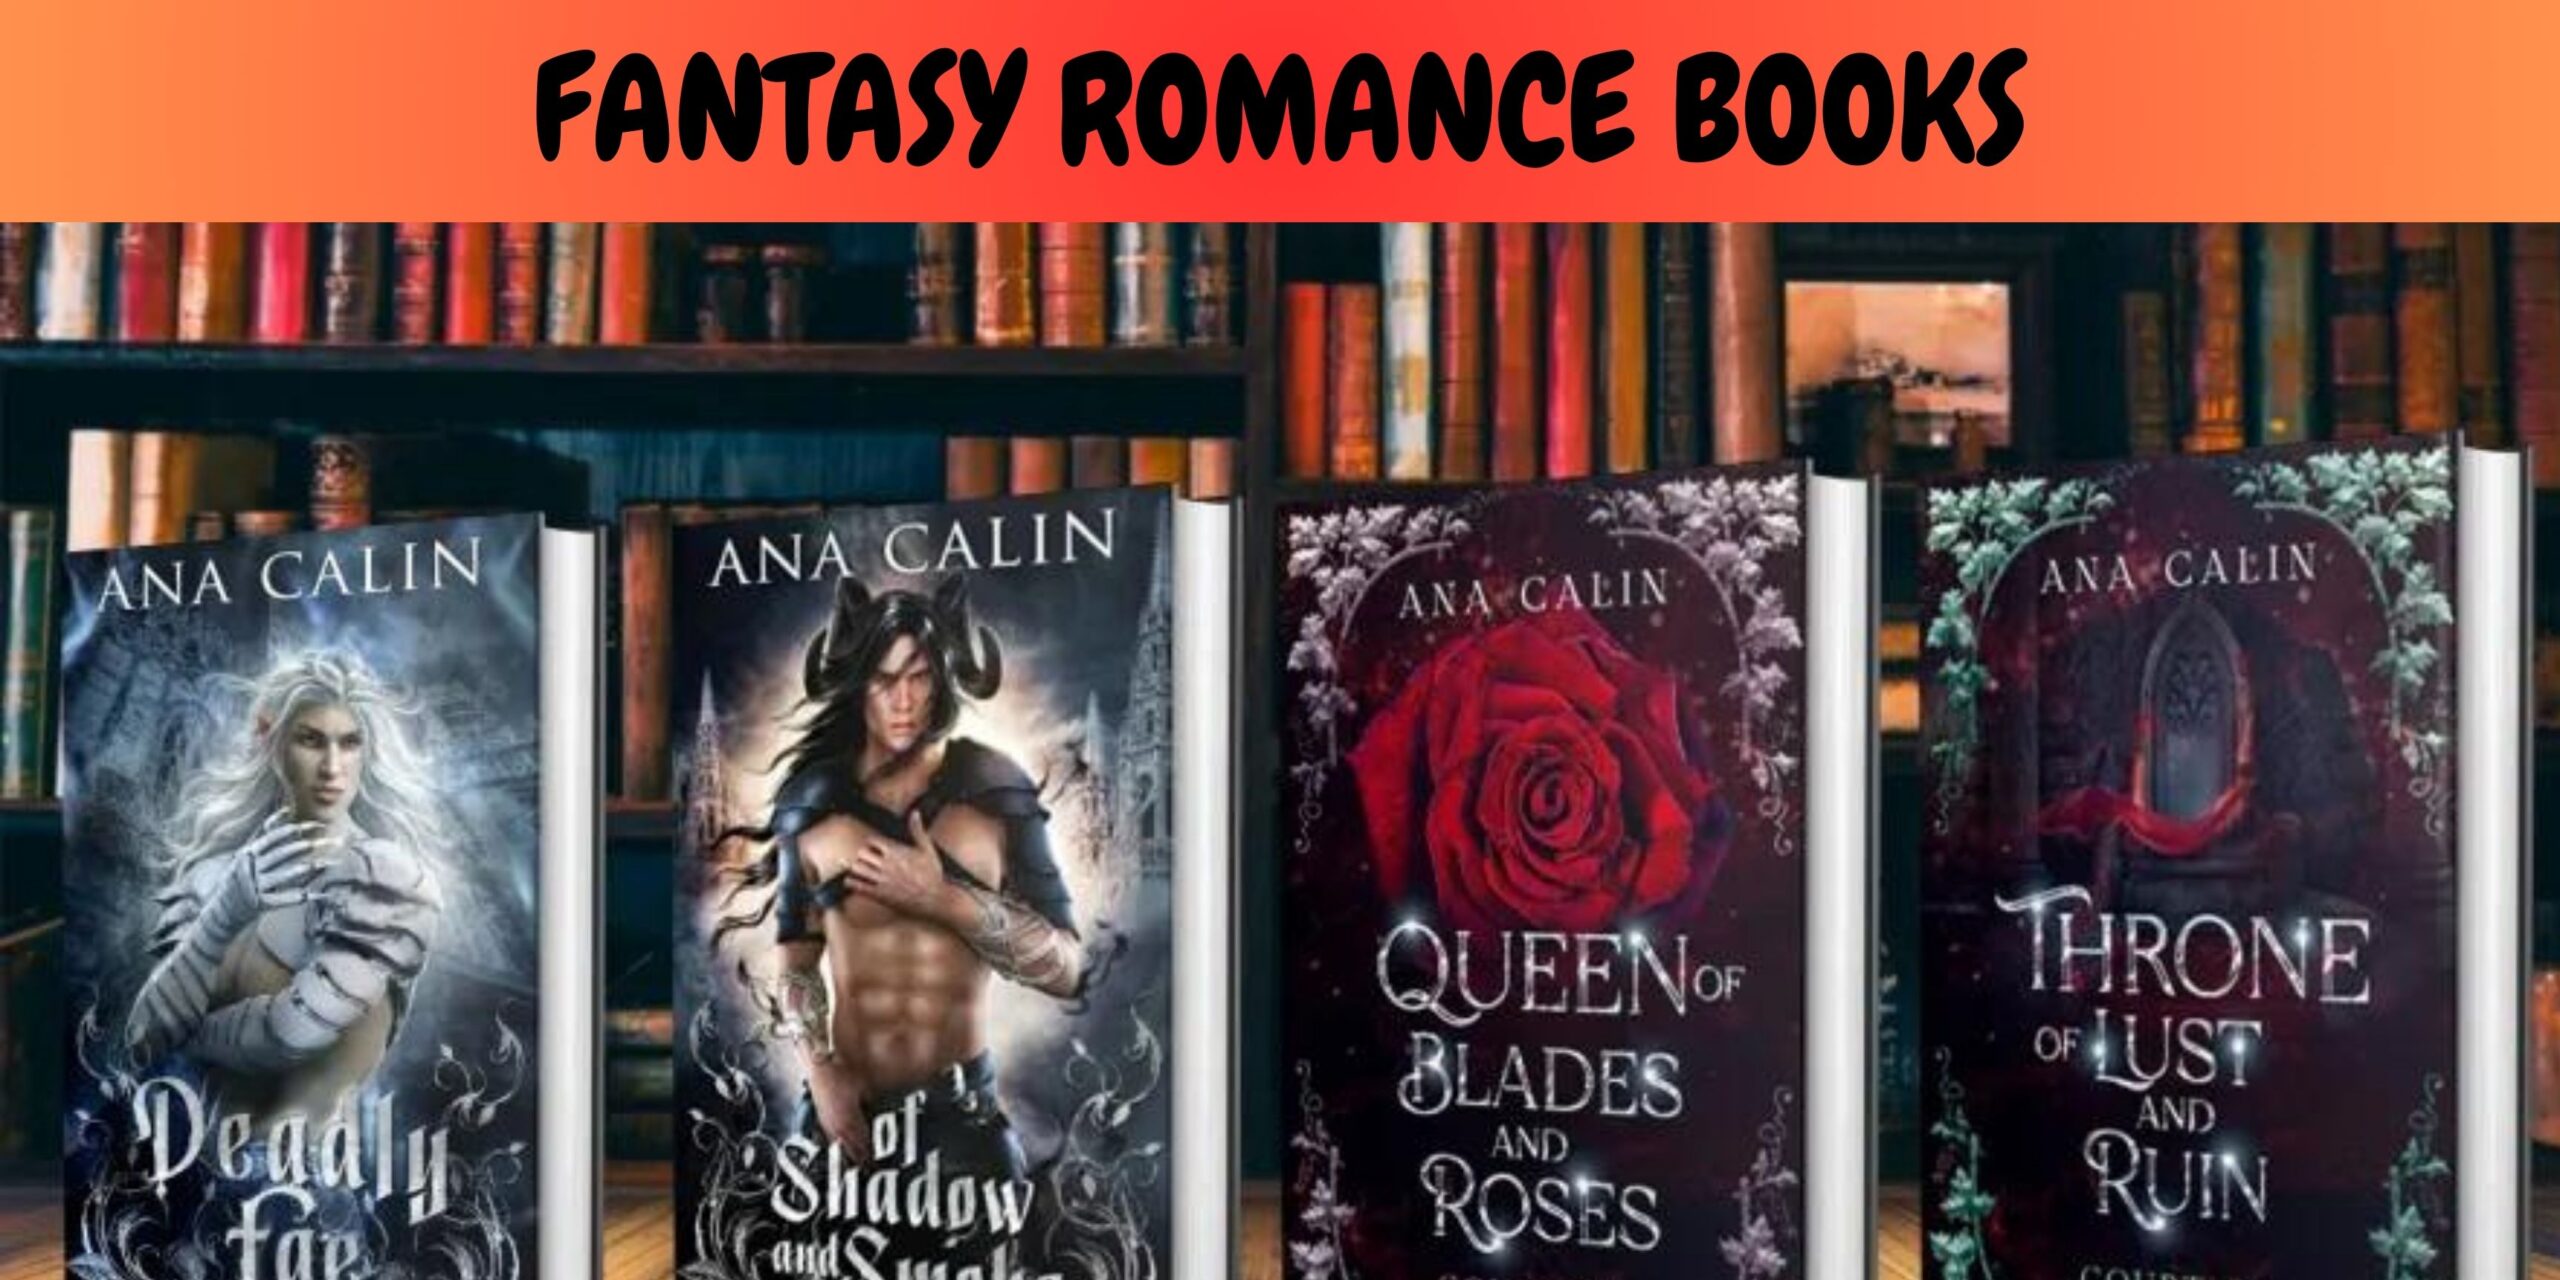 An Introduction to Fantasy Romance Books